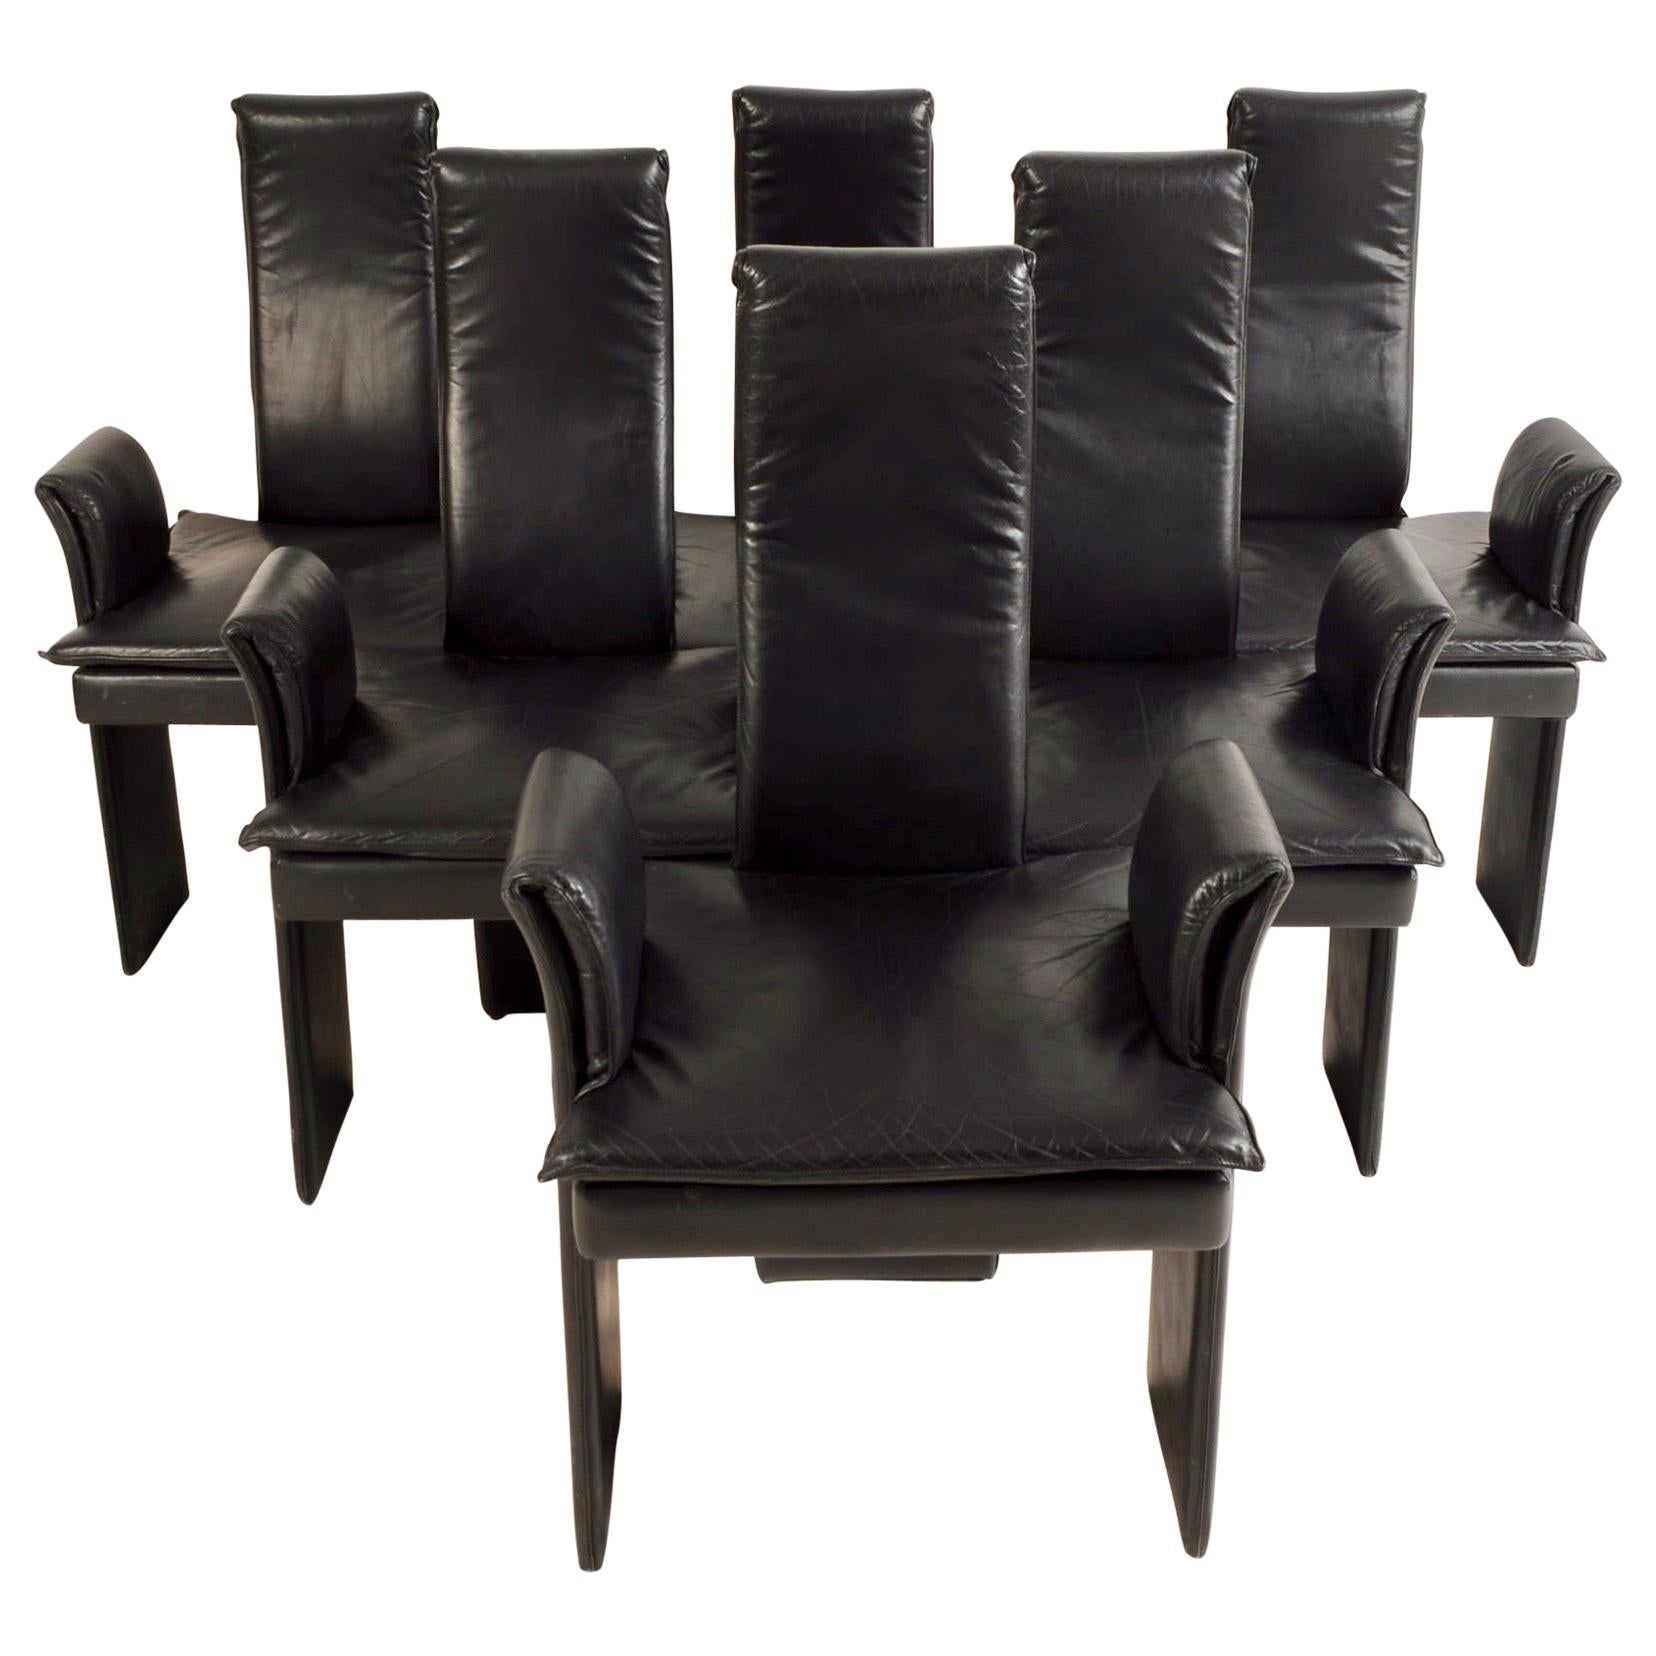 Italian High Backed Leather Dining Chairs